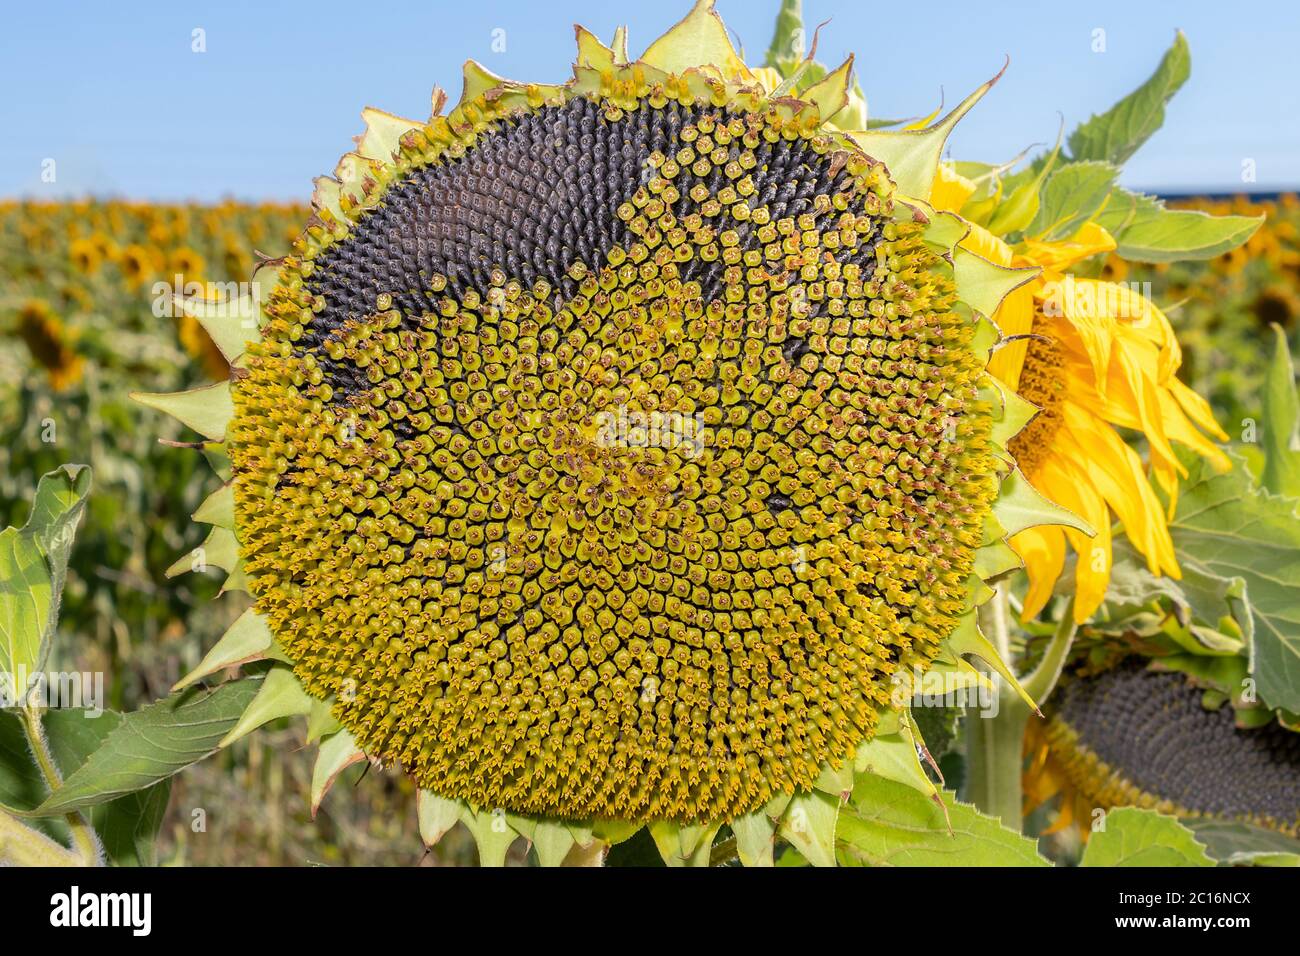 Detail of seeds in wilted sunflower Stock Photo - Alamy